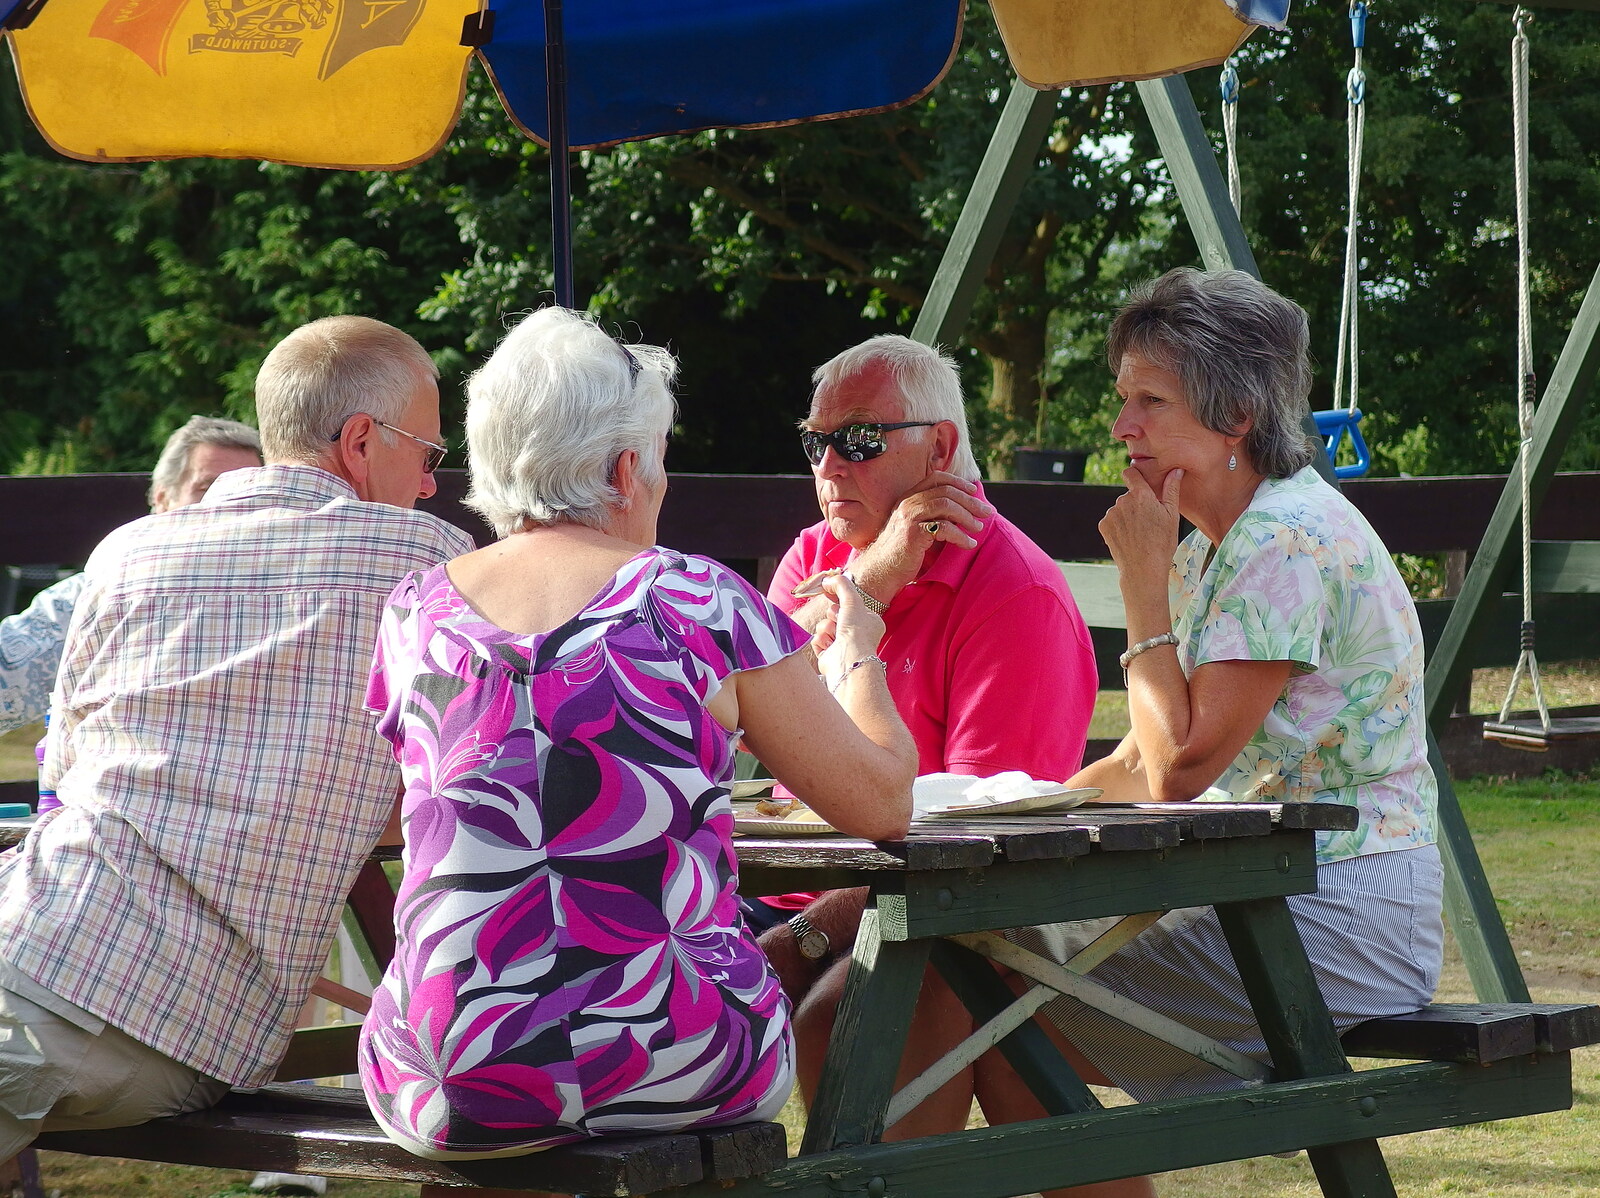 John Willy, Spammy, Colin and Jill from The BSCC at Walpole, and a Swan Inn Barbeque, Brome, Suffolk - 4th August 2013